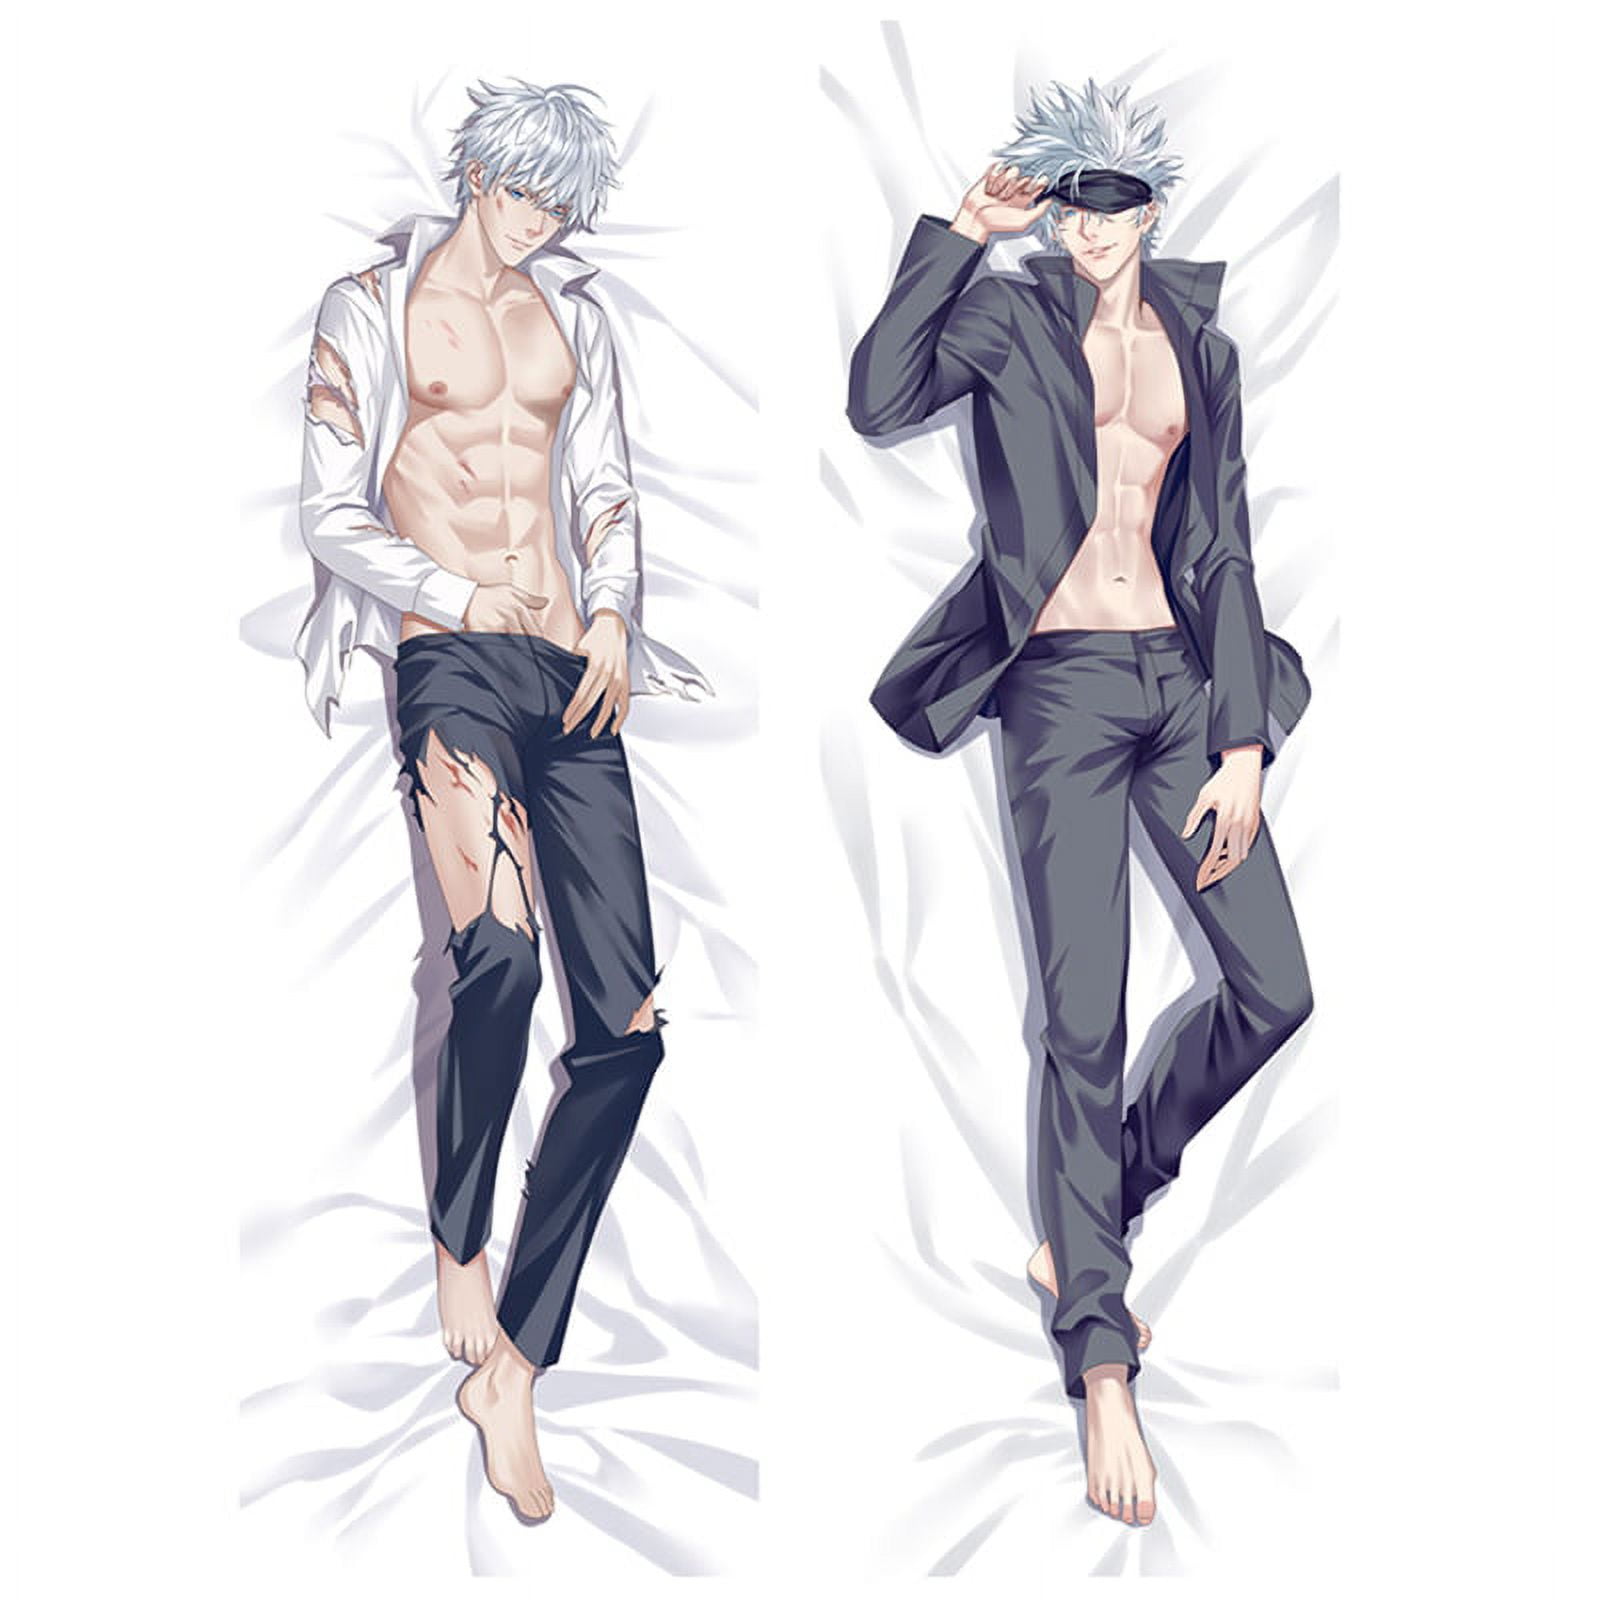 What is a body pillow? How did this become part of anime culture? - Quora